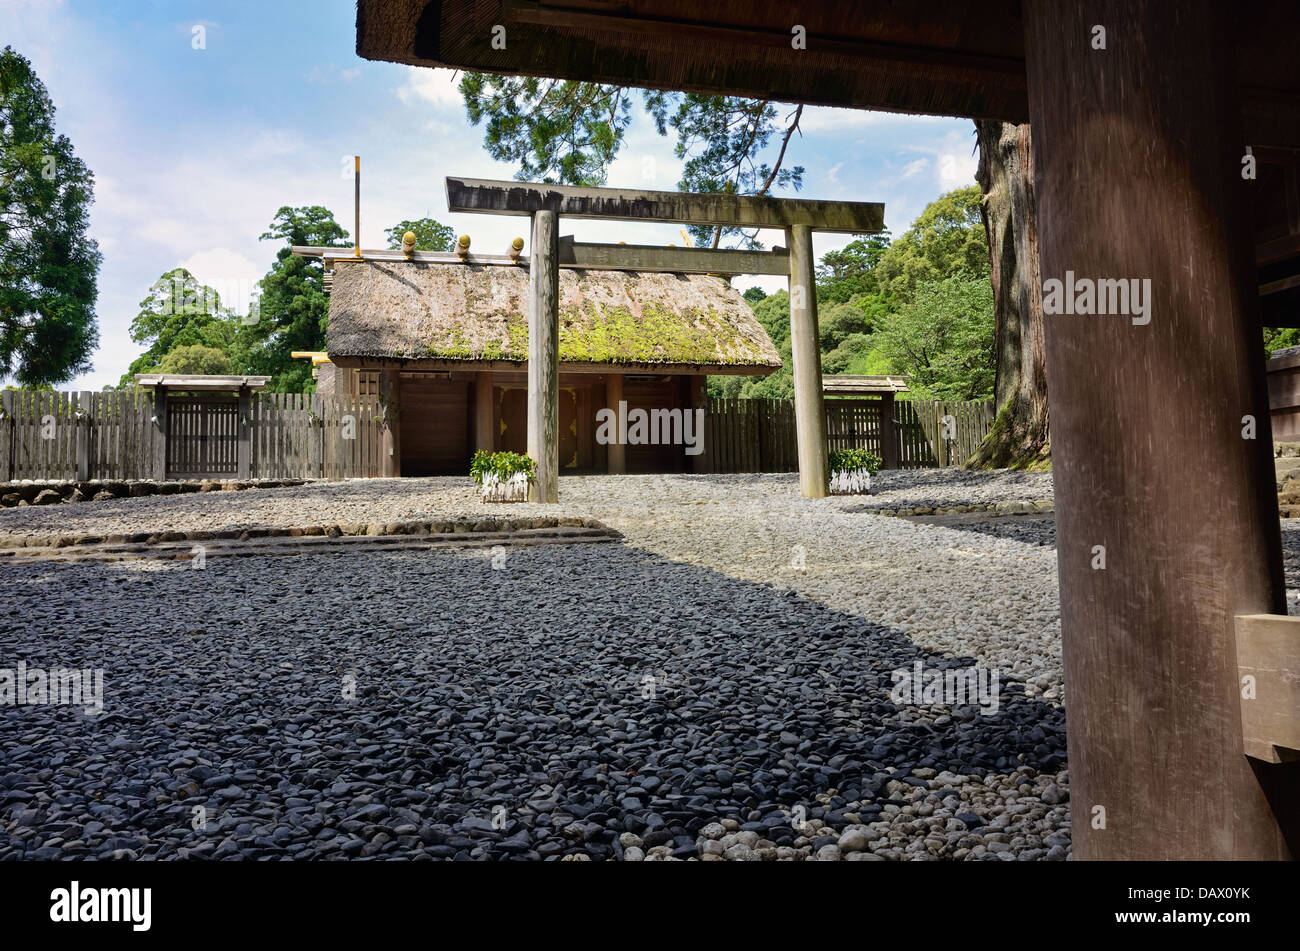 The main Shinto sanctuary Naikū (内宮) located in Ise Grand Shrine complex, in Mie prefecture, Japan. Stock Photo